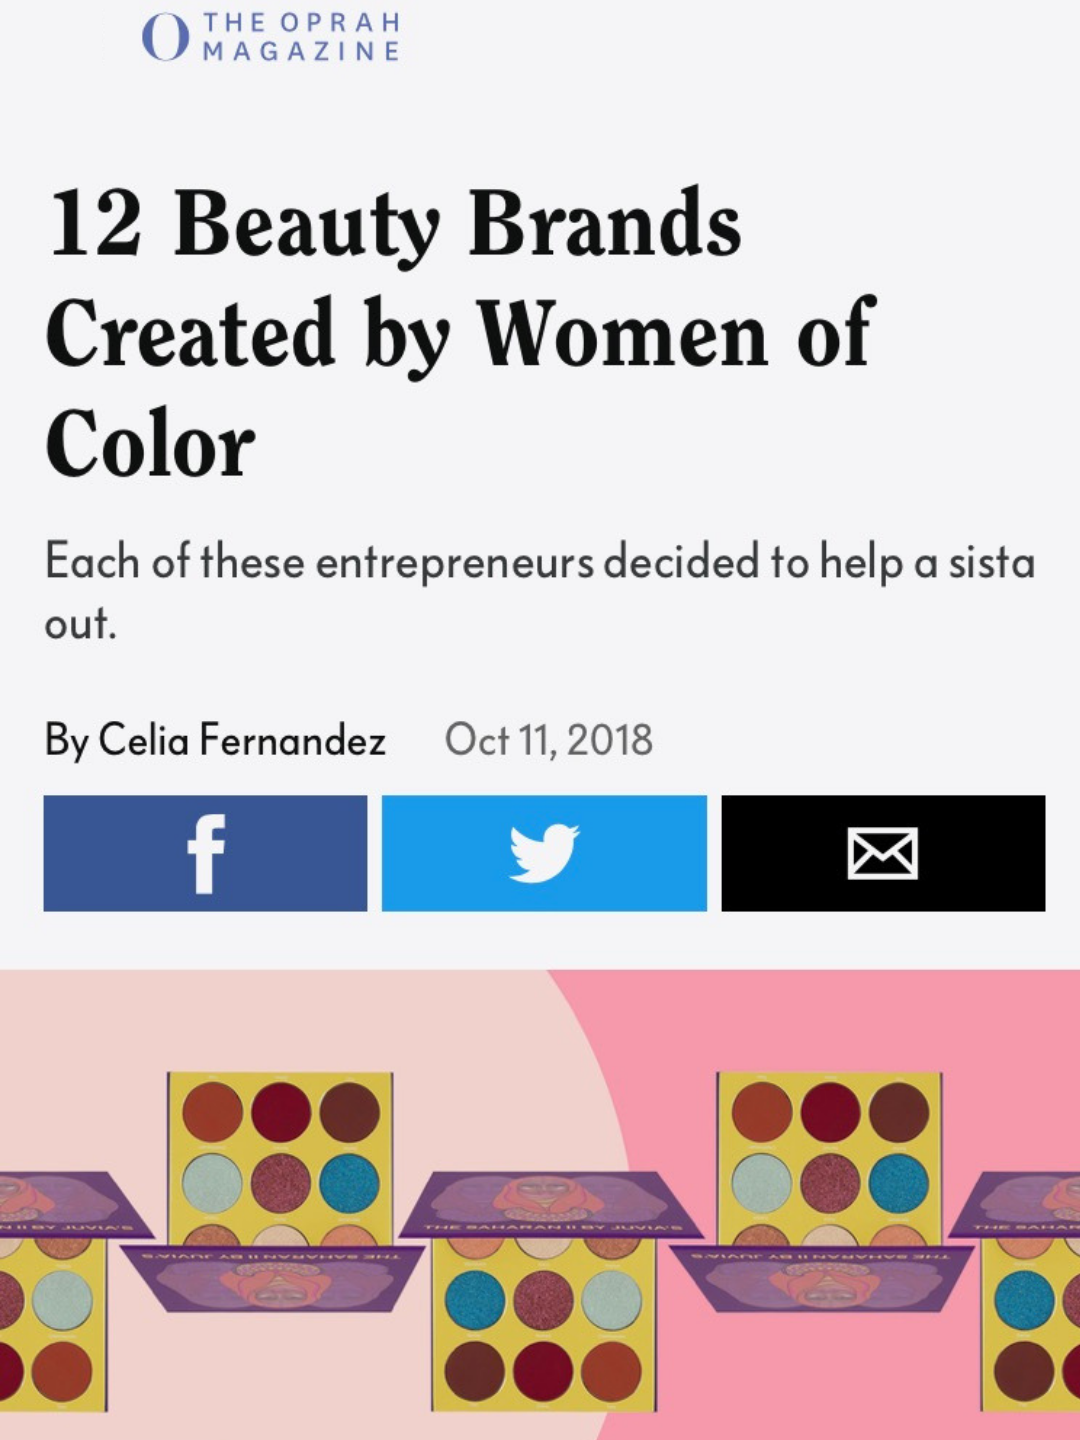 12 Beauty Brands Created by Women of Color